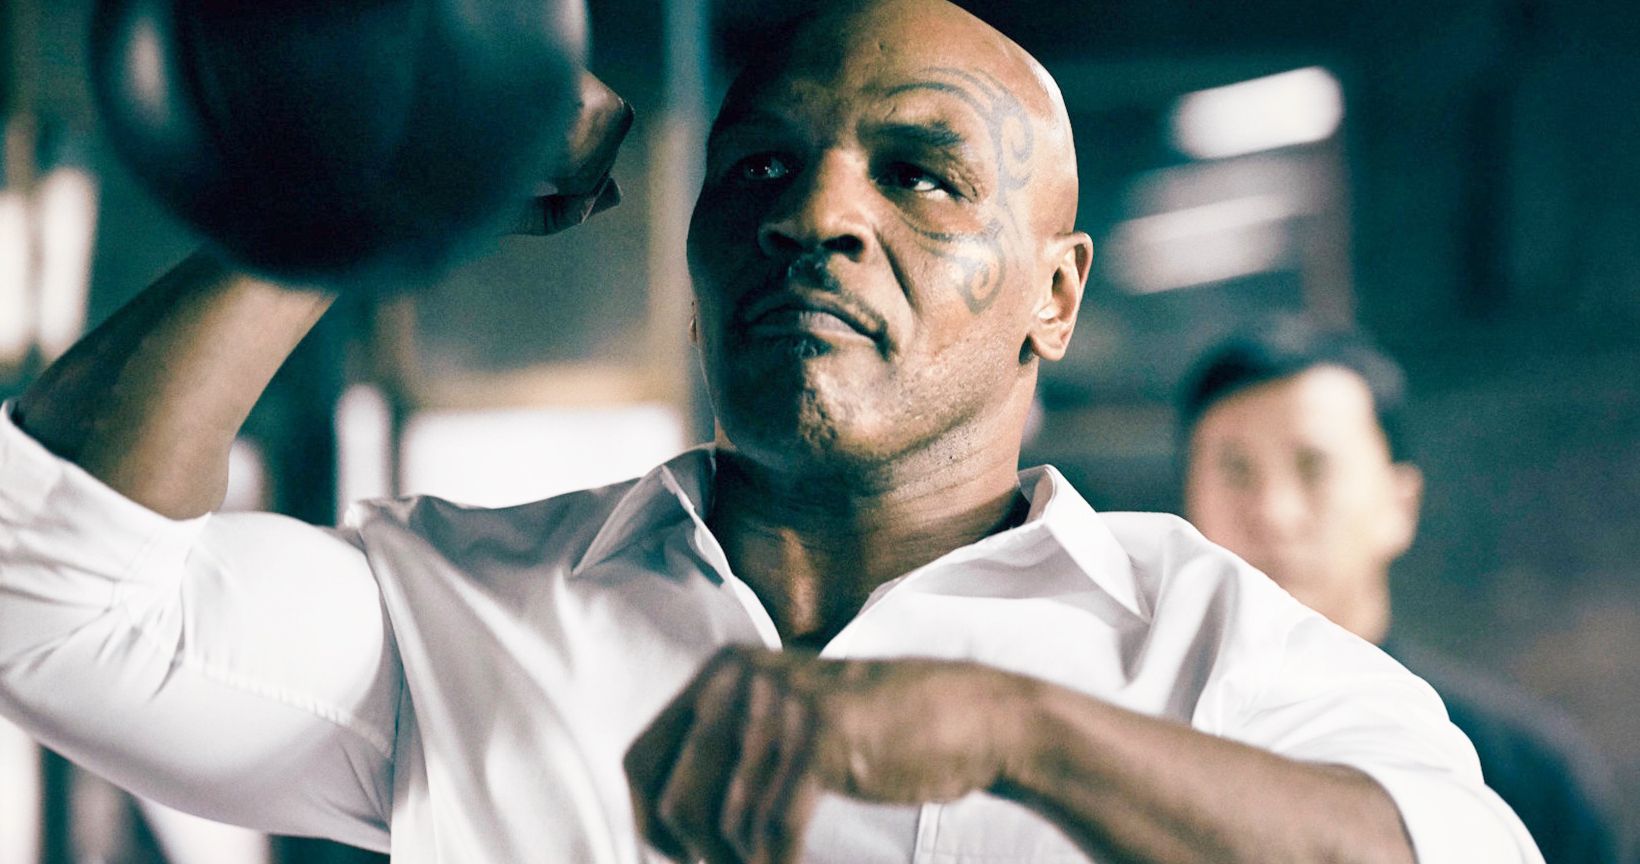 Iron Mike Miniseries Planned at Hulu and Mike Tyson Does Not Approve